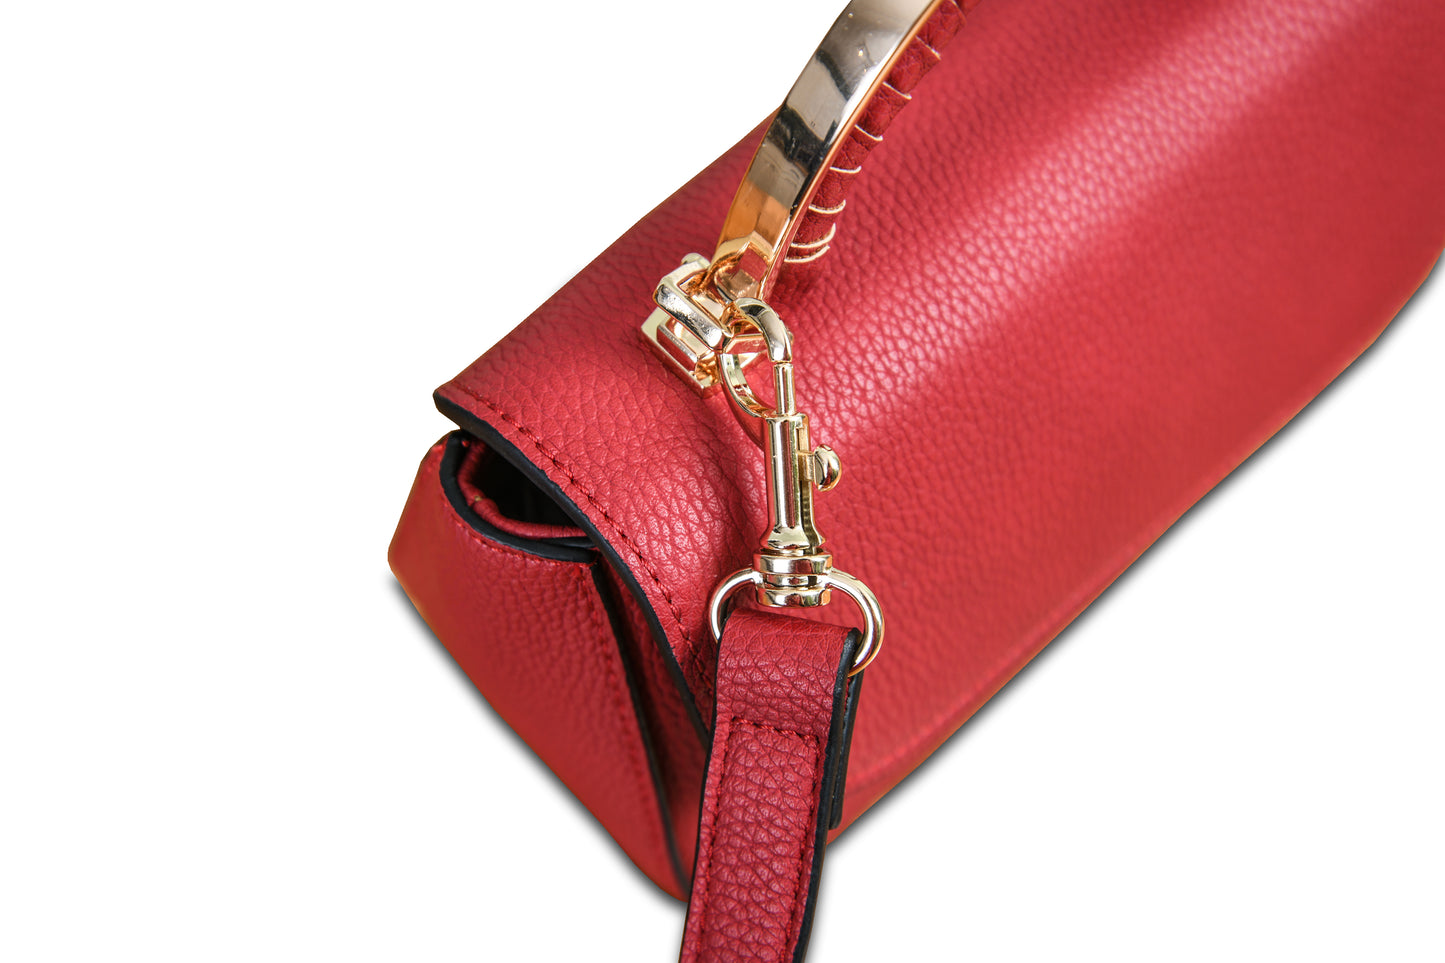 Mini Crossbody Pebble Grain Faux Leather Scarlet Red Handbag made by Dewi Maya gold shoulder strap clasp available at the best boutique in Upstate South Carolina Spartanburg Greenville Dewi Maya Boutique